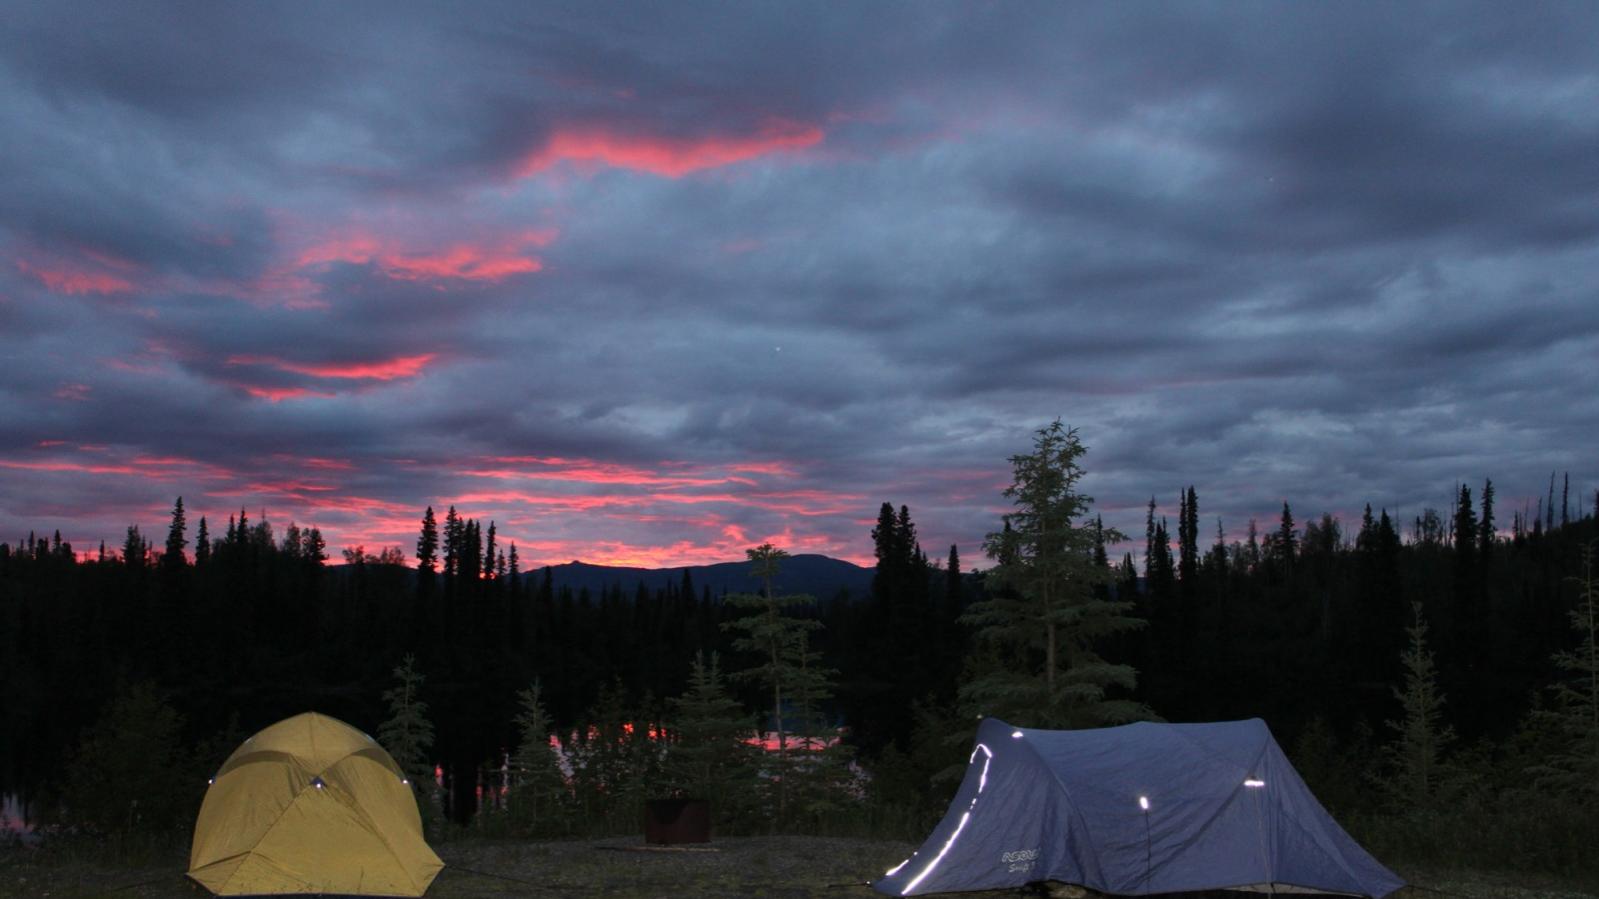 An Evening Sunset over the Exploration Camp at the Dragon Lake Gold Project Yukon Territory